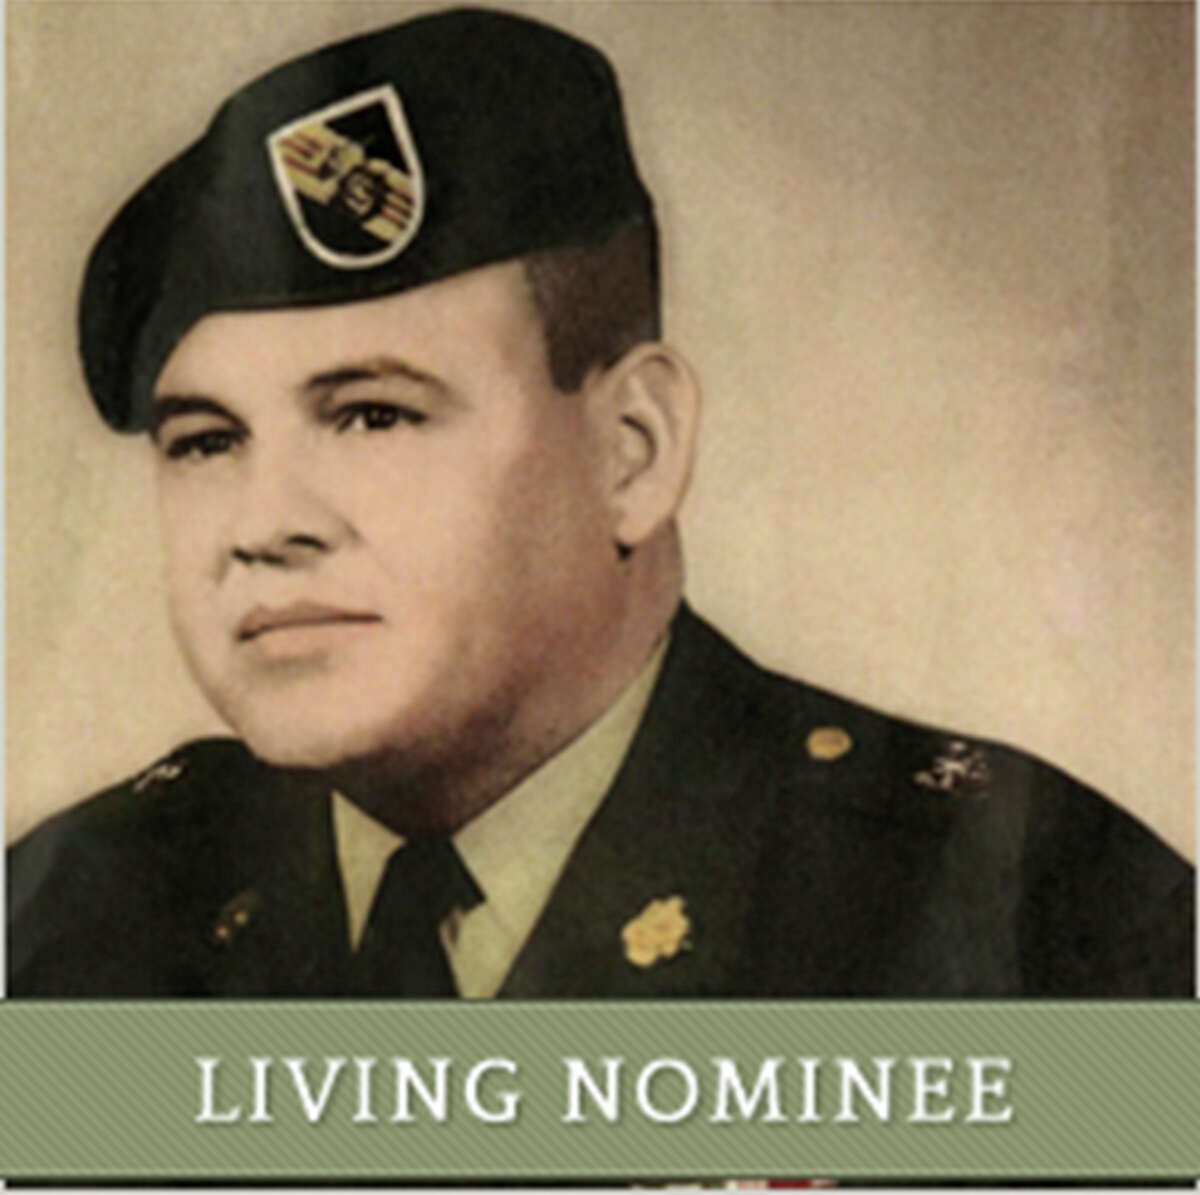 Medal of Honor nominee Jose Rodela was born in Corpus Christi, Texas, June 15, 1937. He entered the U.S. Army in September 1955, at the age of 17. Rodela is being recognized for his valorous actions on Sept. 1, 1969, while serving as the company commander in Phuoc Long Province, Vietnam. Rodela commanded his company throughout 18 hours of continuous contact when his battalion was attacked and taking heavy casualties. Throughout the battle, in spite of his wounds, Rodela repeatedly exposed himself to enemy fire to attend to the fallen and eliminate an enemy rocket position. Rodela retired from the Army in 1975. He currently resides in San Antonio, Texas. In addition to the Medal of Honor, Rodela received the Distinguished Service Cross (this award will be upgraded to the Medal of Honor on Mar. 18), Bronze Star Medal, Purple Heart with one Bronze Oak Leaf Cluster, Air Medal with "V" Device, Army Commendation Medal with one Bronze Oak Leaf Cluster, Army Good Conduct Medal with Silver Clasp and one Loop, National Defense Service Medal, Vietnam Service Medal with one Silver Service Star, Korea Defense Service Medal, Meritorious Unit Commendation with one Bronze Oak Leaf Cluster, Combat Infantryman Badge, Master Parachutist Badge, Expert Marksmanship Badge with Rifle Bar, Special Forces Tab, Republic of Vietnam Campaign Medal with "60" Device, Republic of Vietnam Gallantry Cross Unit Citation with Palm Device, Republic of Vietnam Civil Actions Honor Medal Unit Citation First Class, Republic of Vietnam Special Forces Honorary Jump Wings, Columbian Army Parachutist Badge.